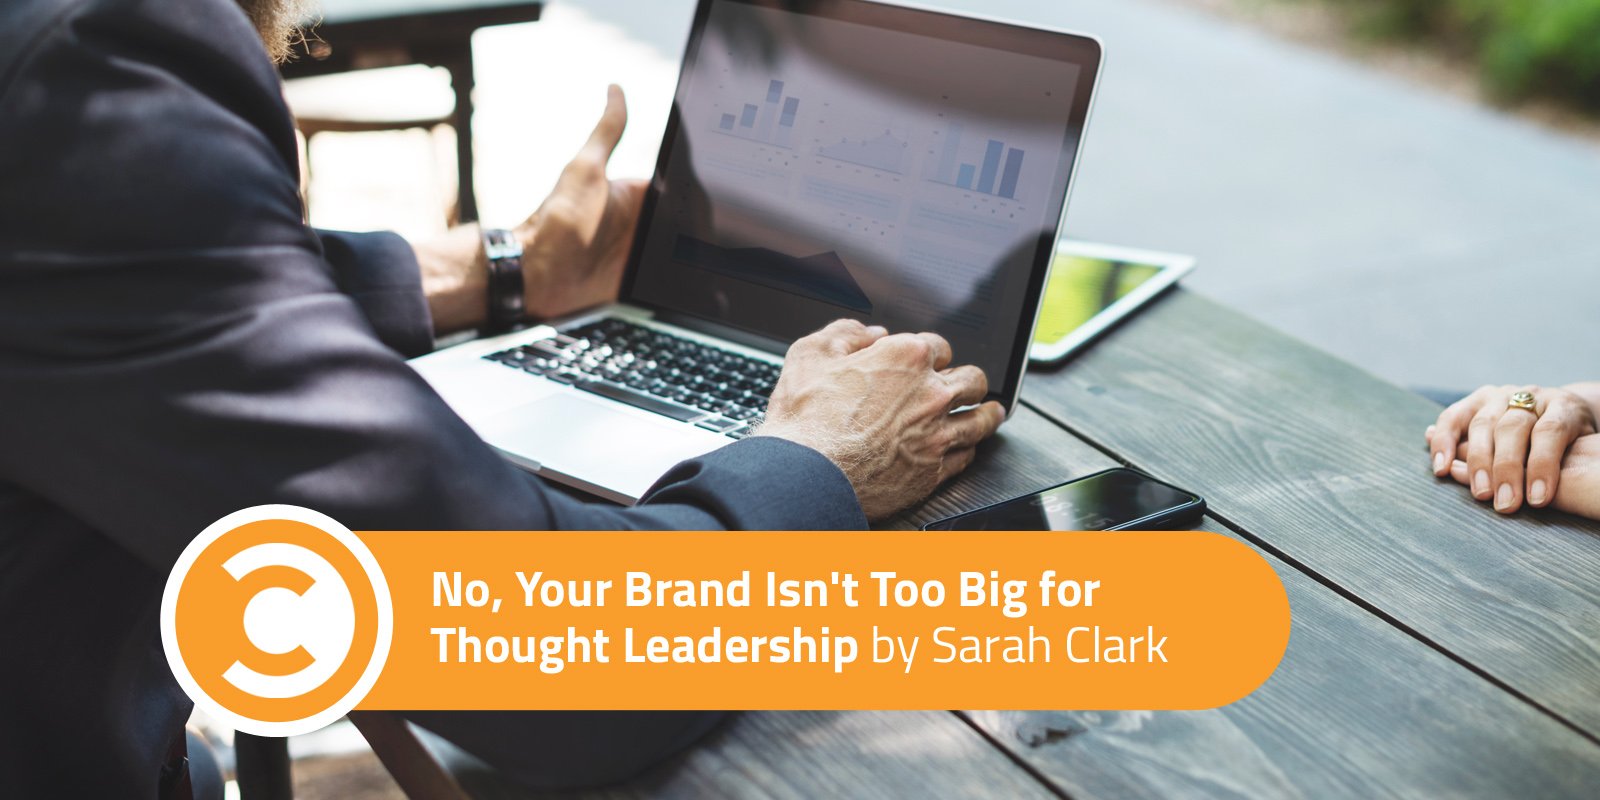 No, Your Brand Isn't Too Big for Thought Leadership